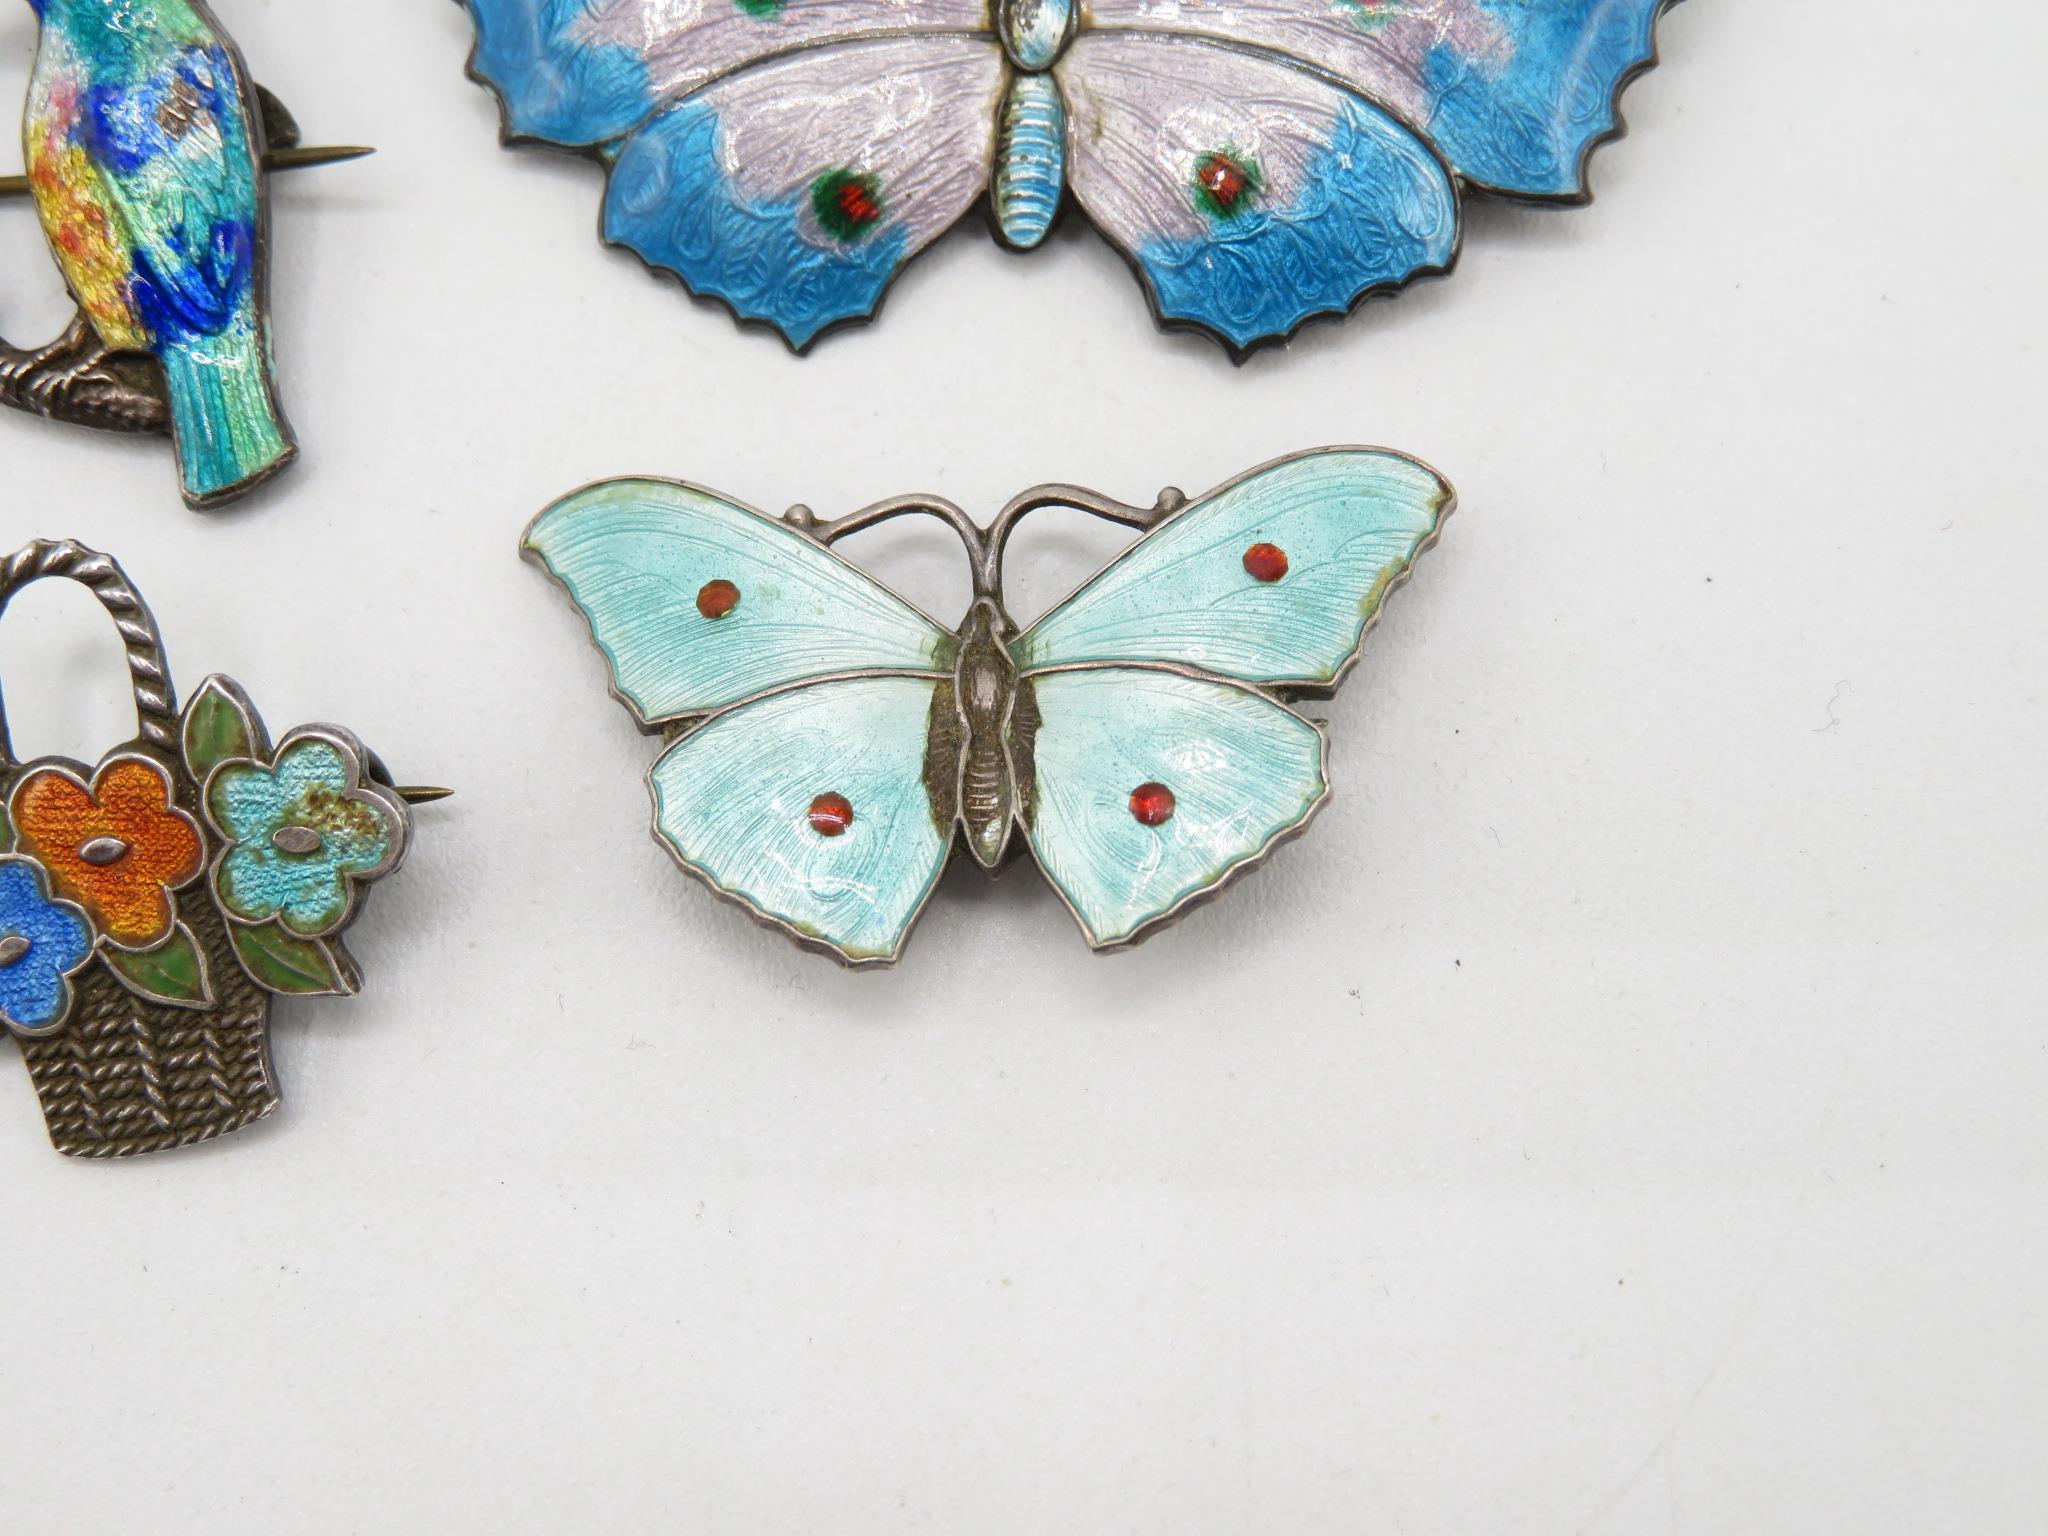 Four Antique Silver Enamel Brooches (25g) - Image 3 of 6